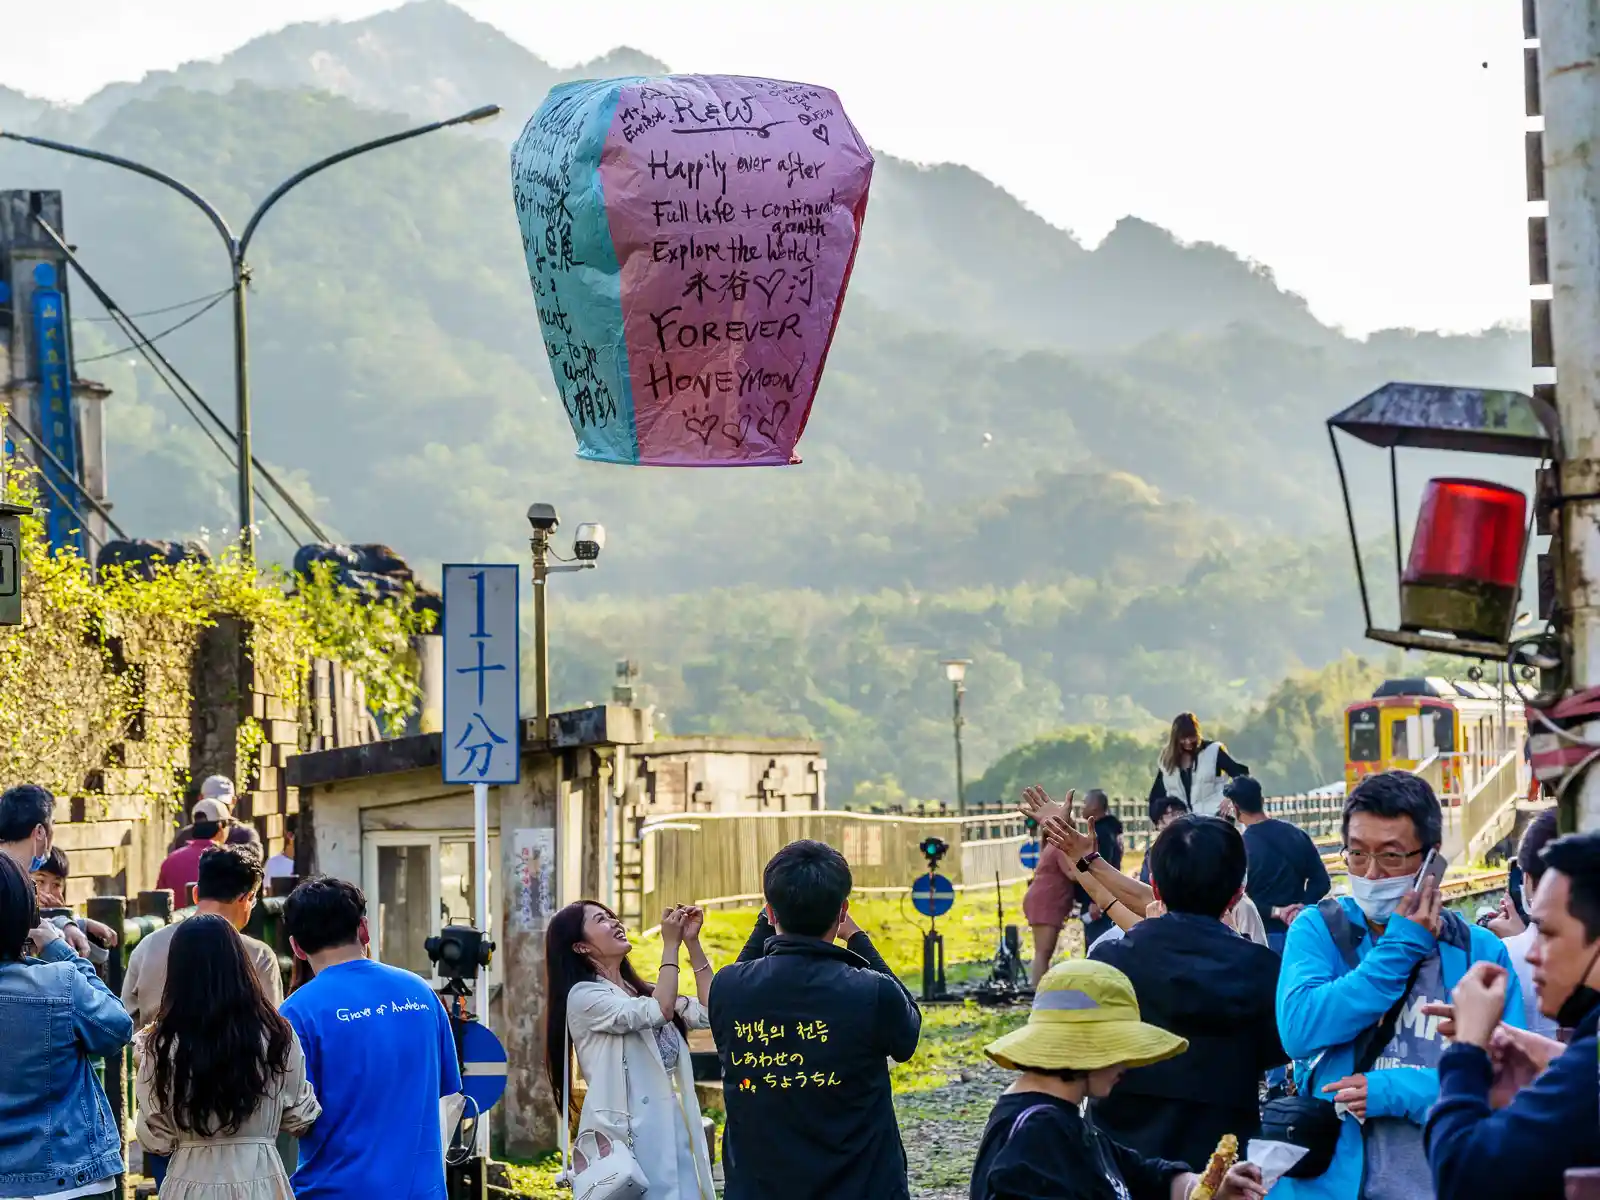 A lantern with several wishes written in English is released into the air.